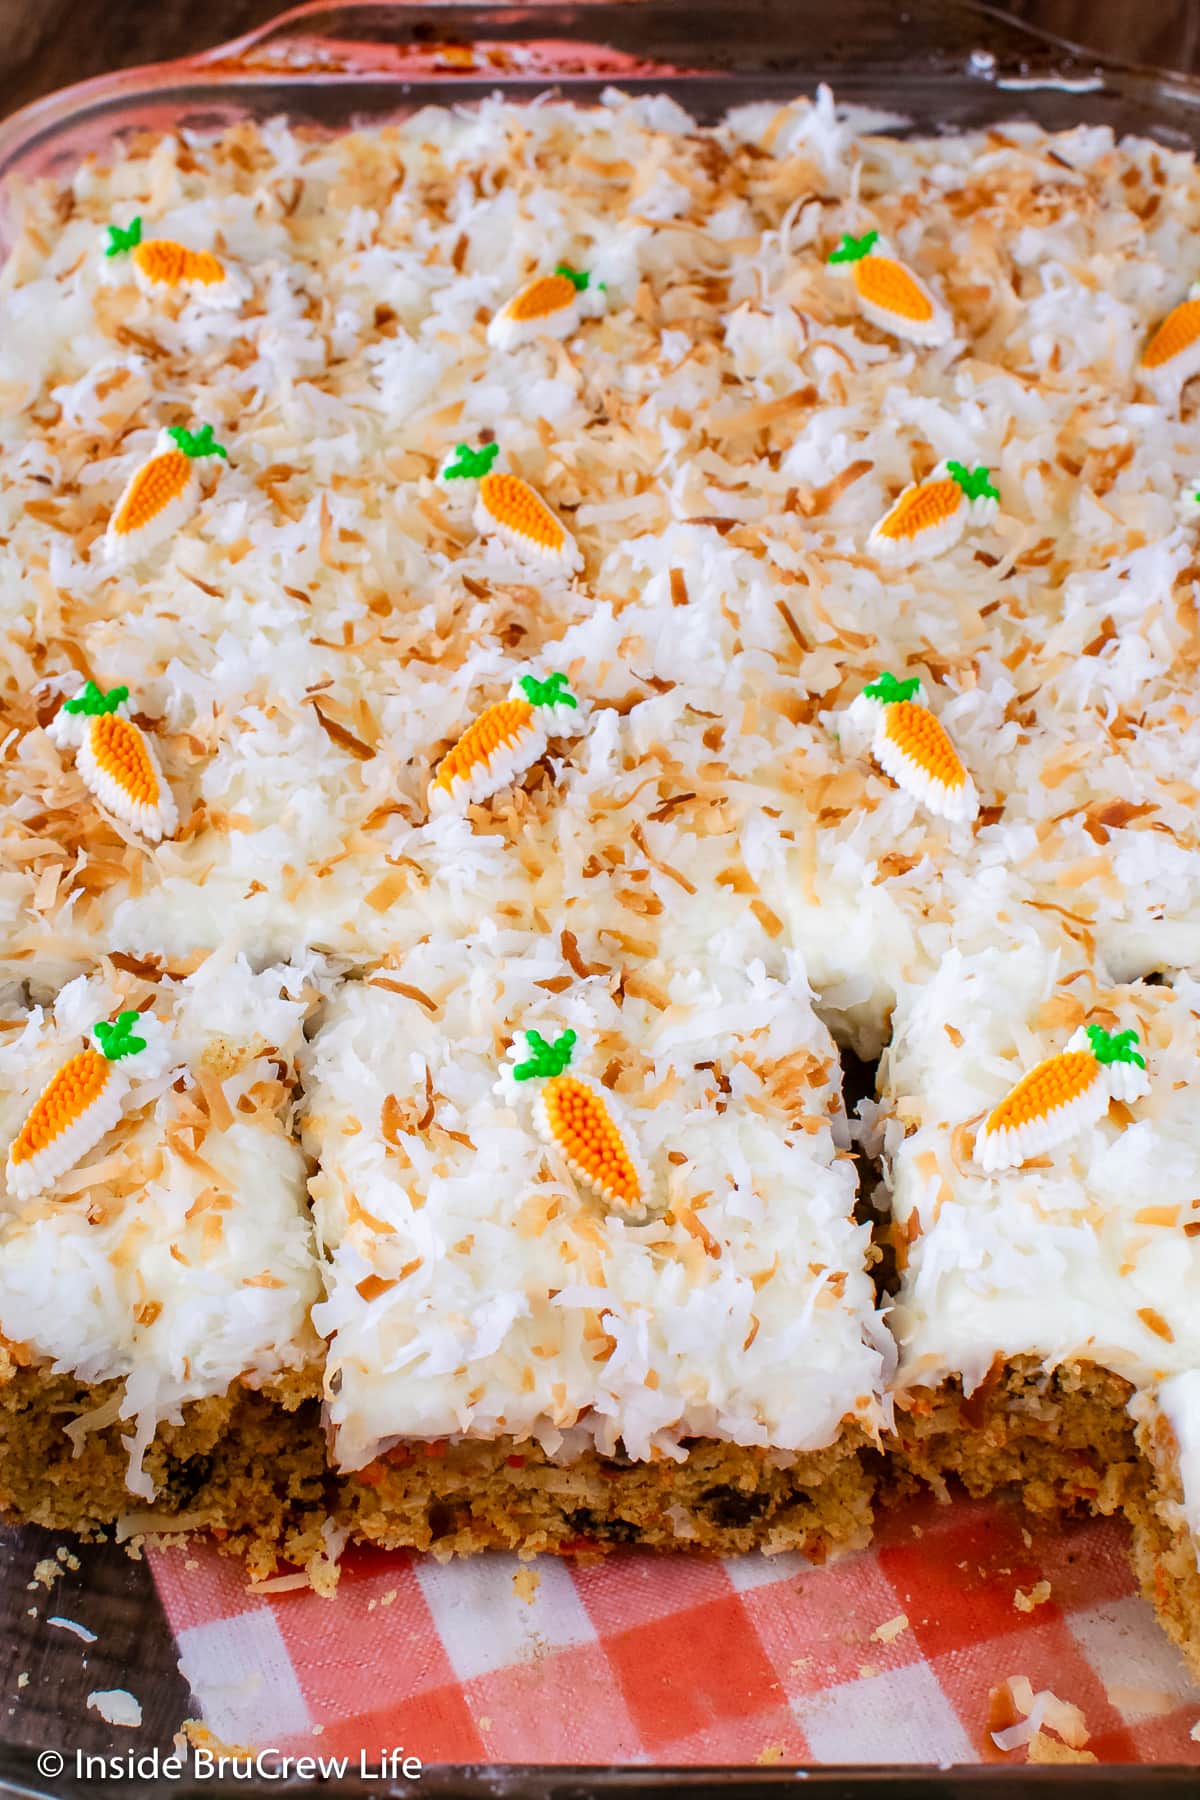 A pan of cake with frosting and toasted coconut.